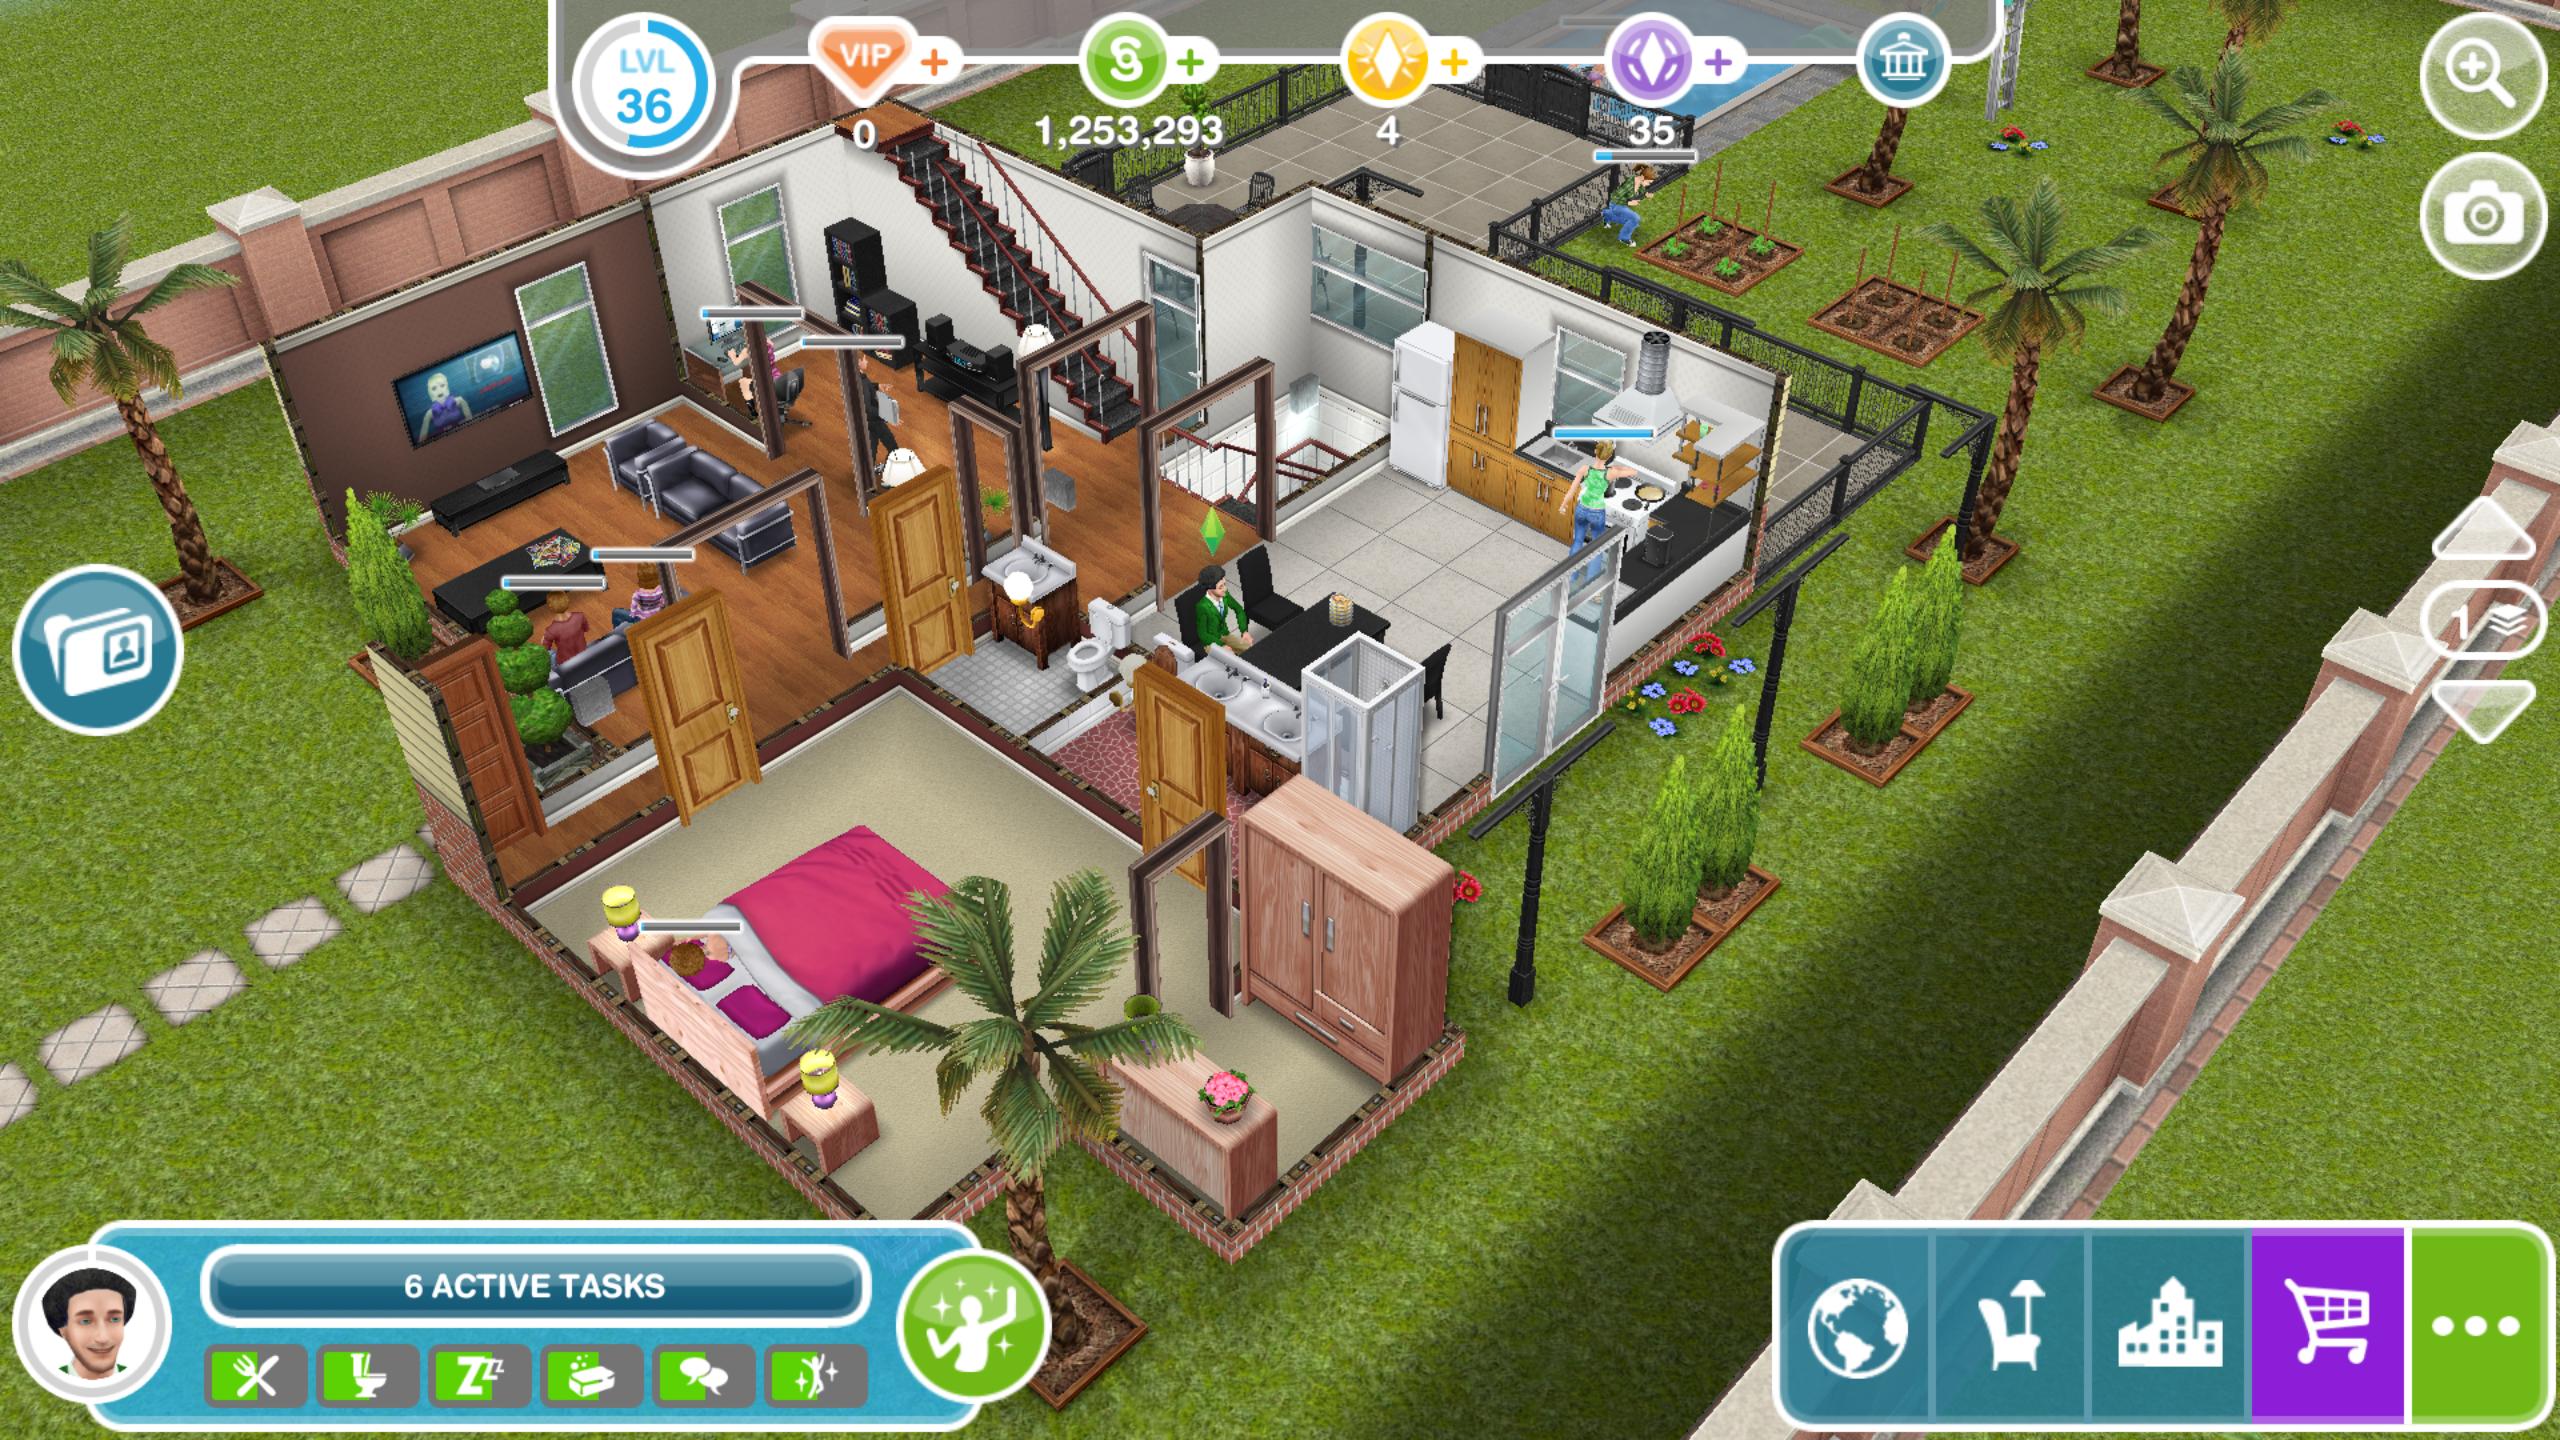 sims free download for windows